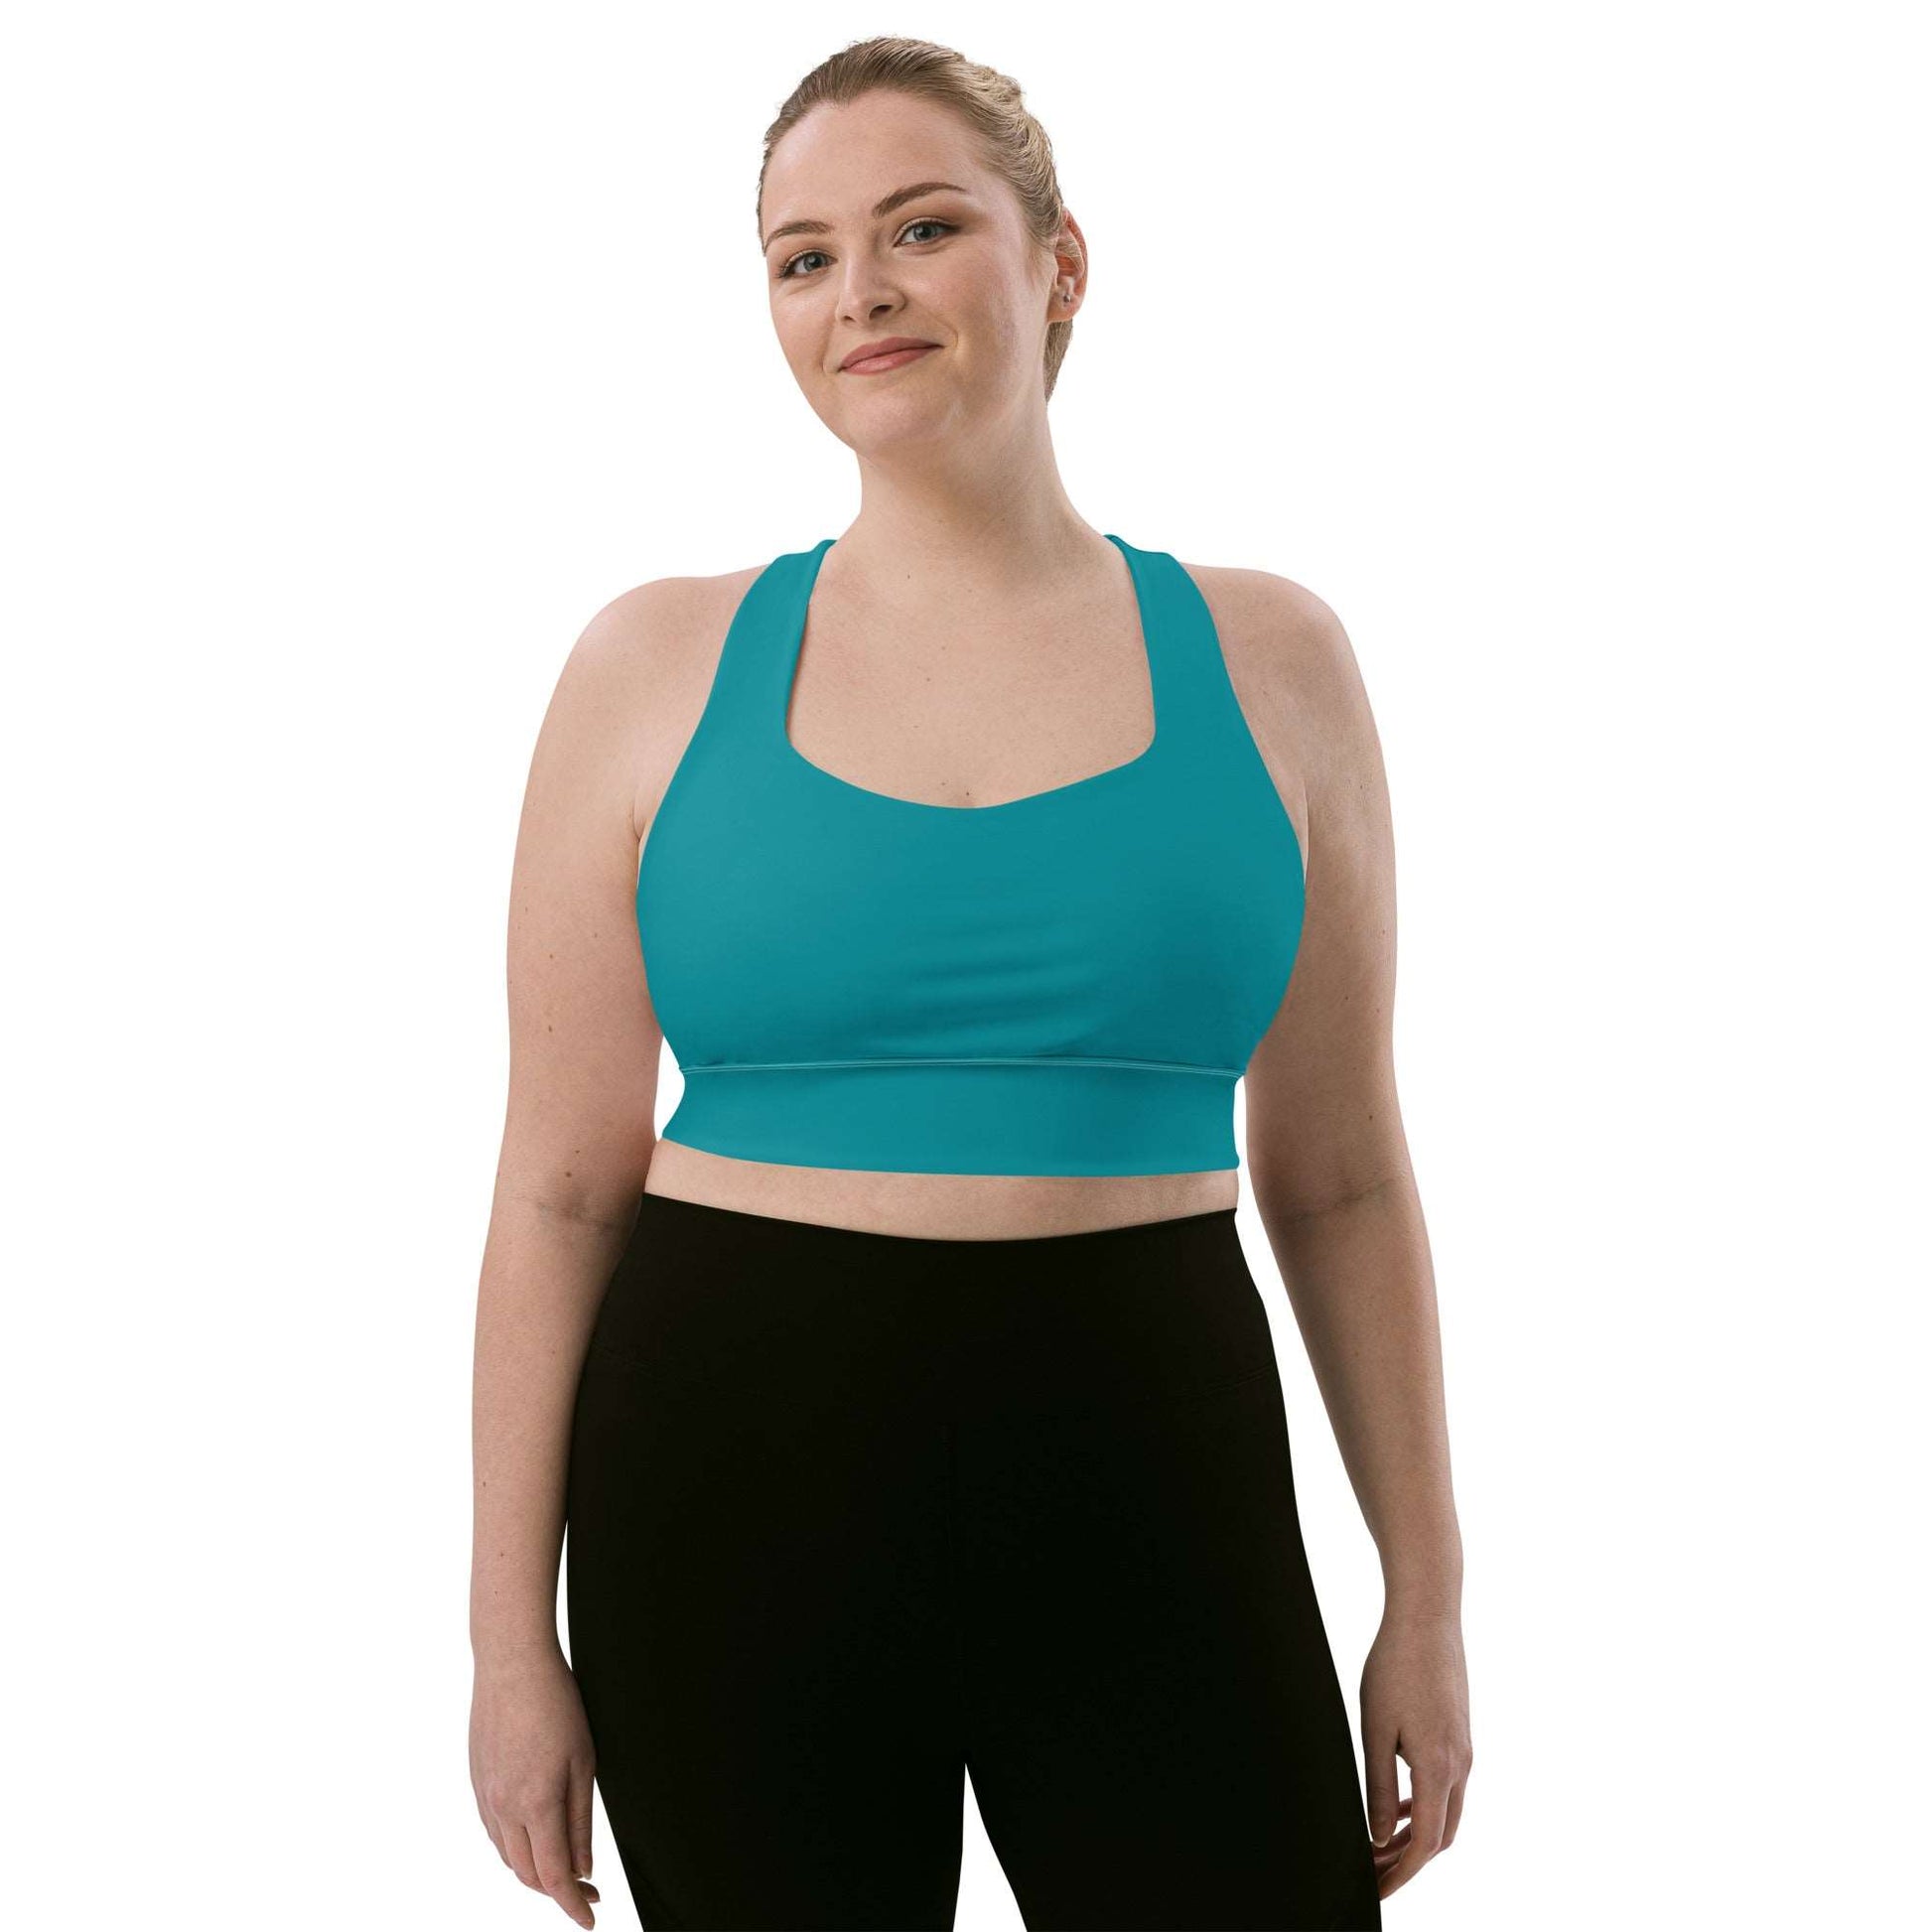 Eastern Blue Longline Women's High Impact Sports Bra exclusive at